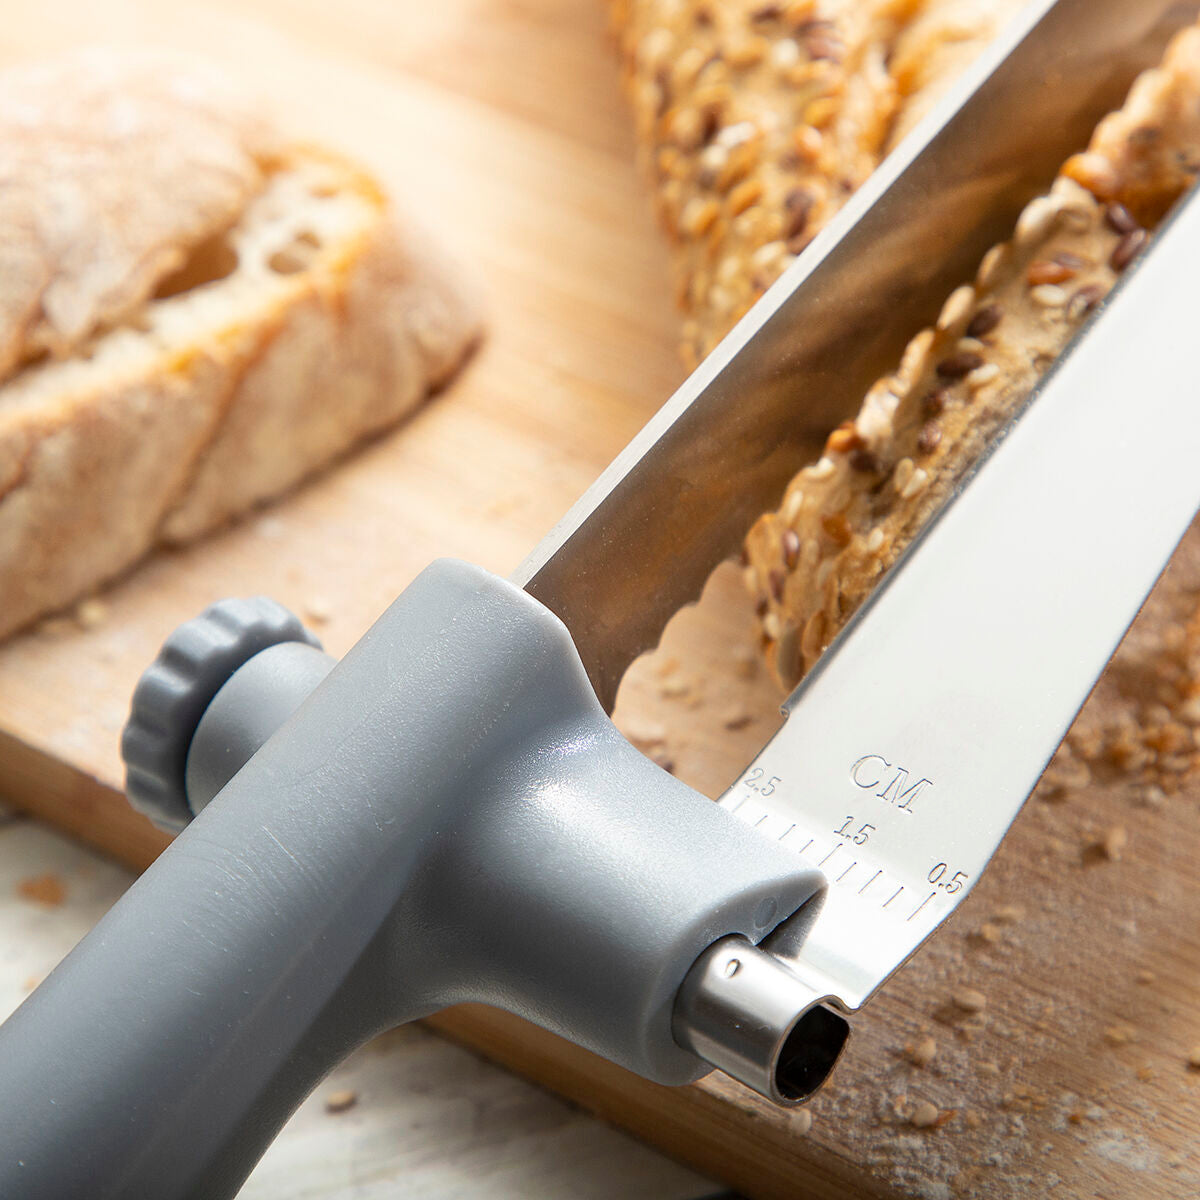 Bread knife with adjustable cutting position